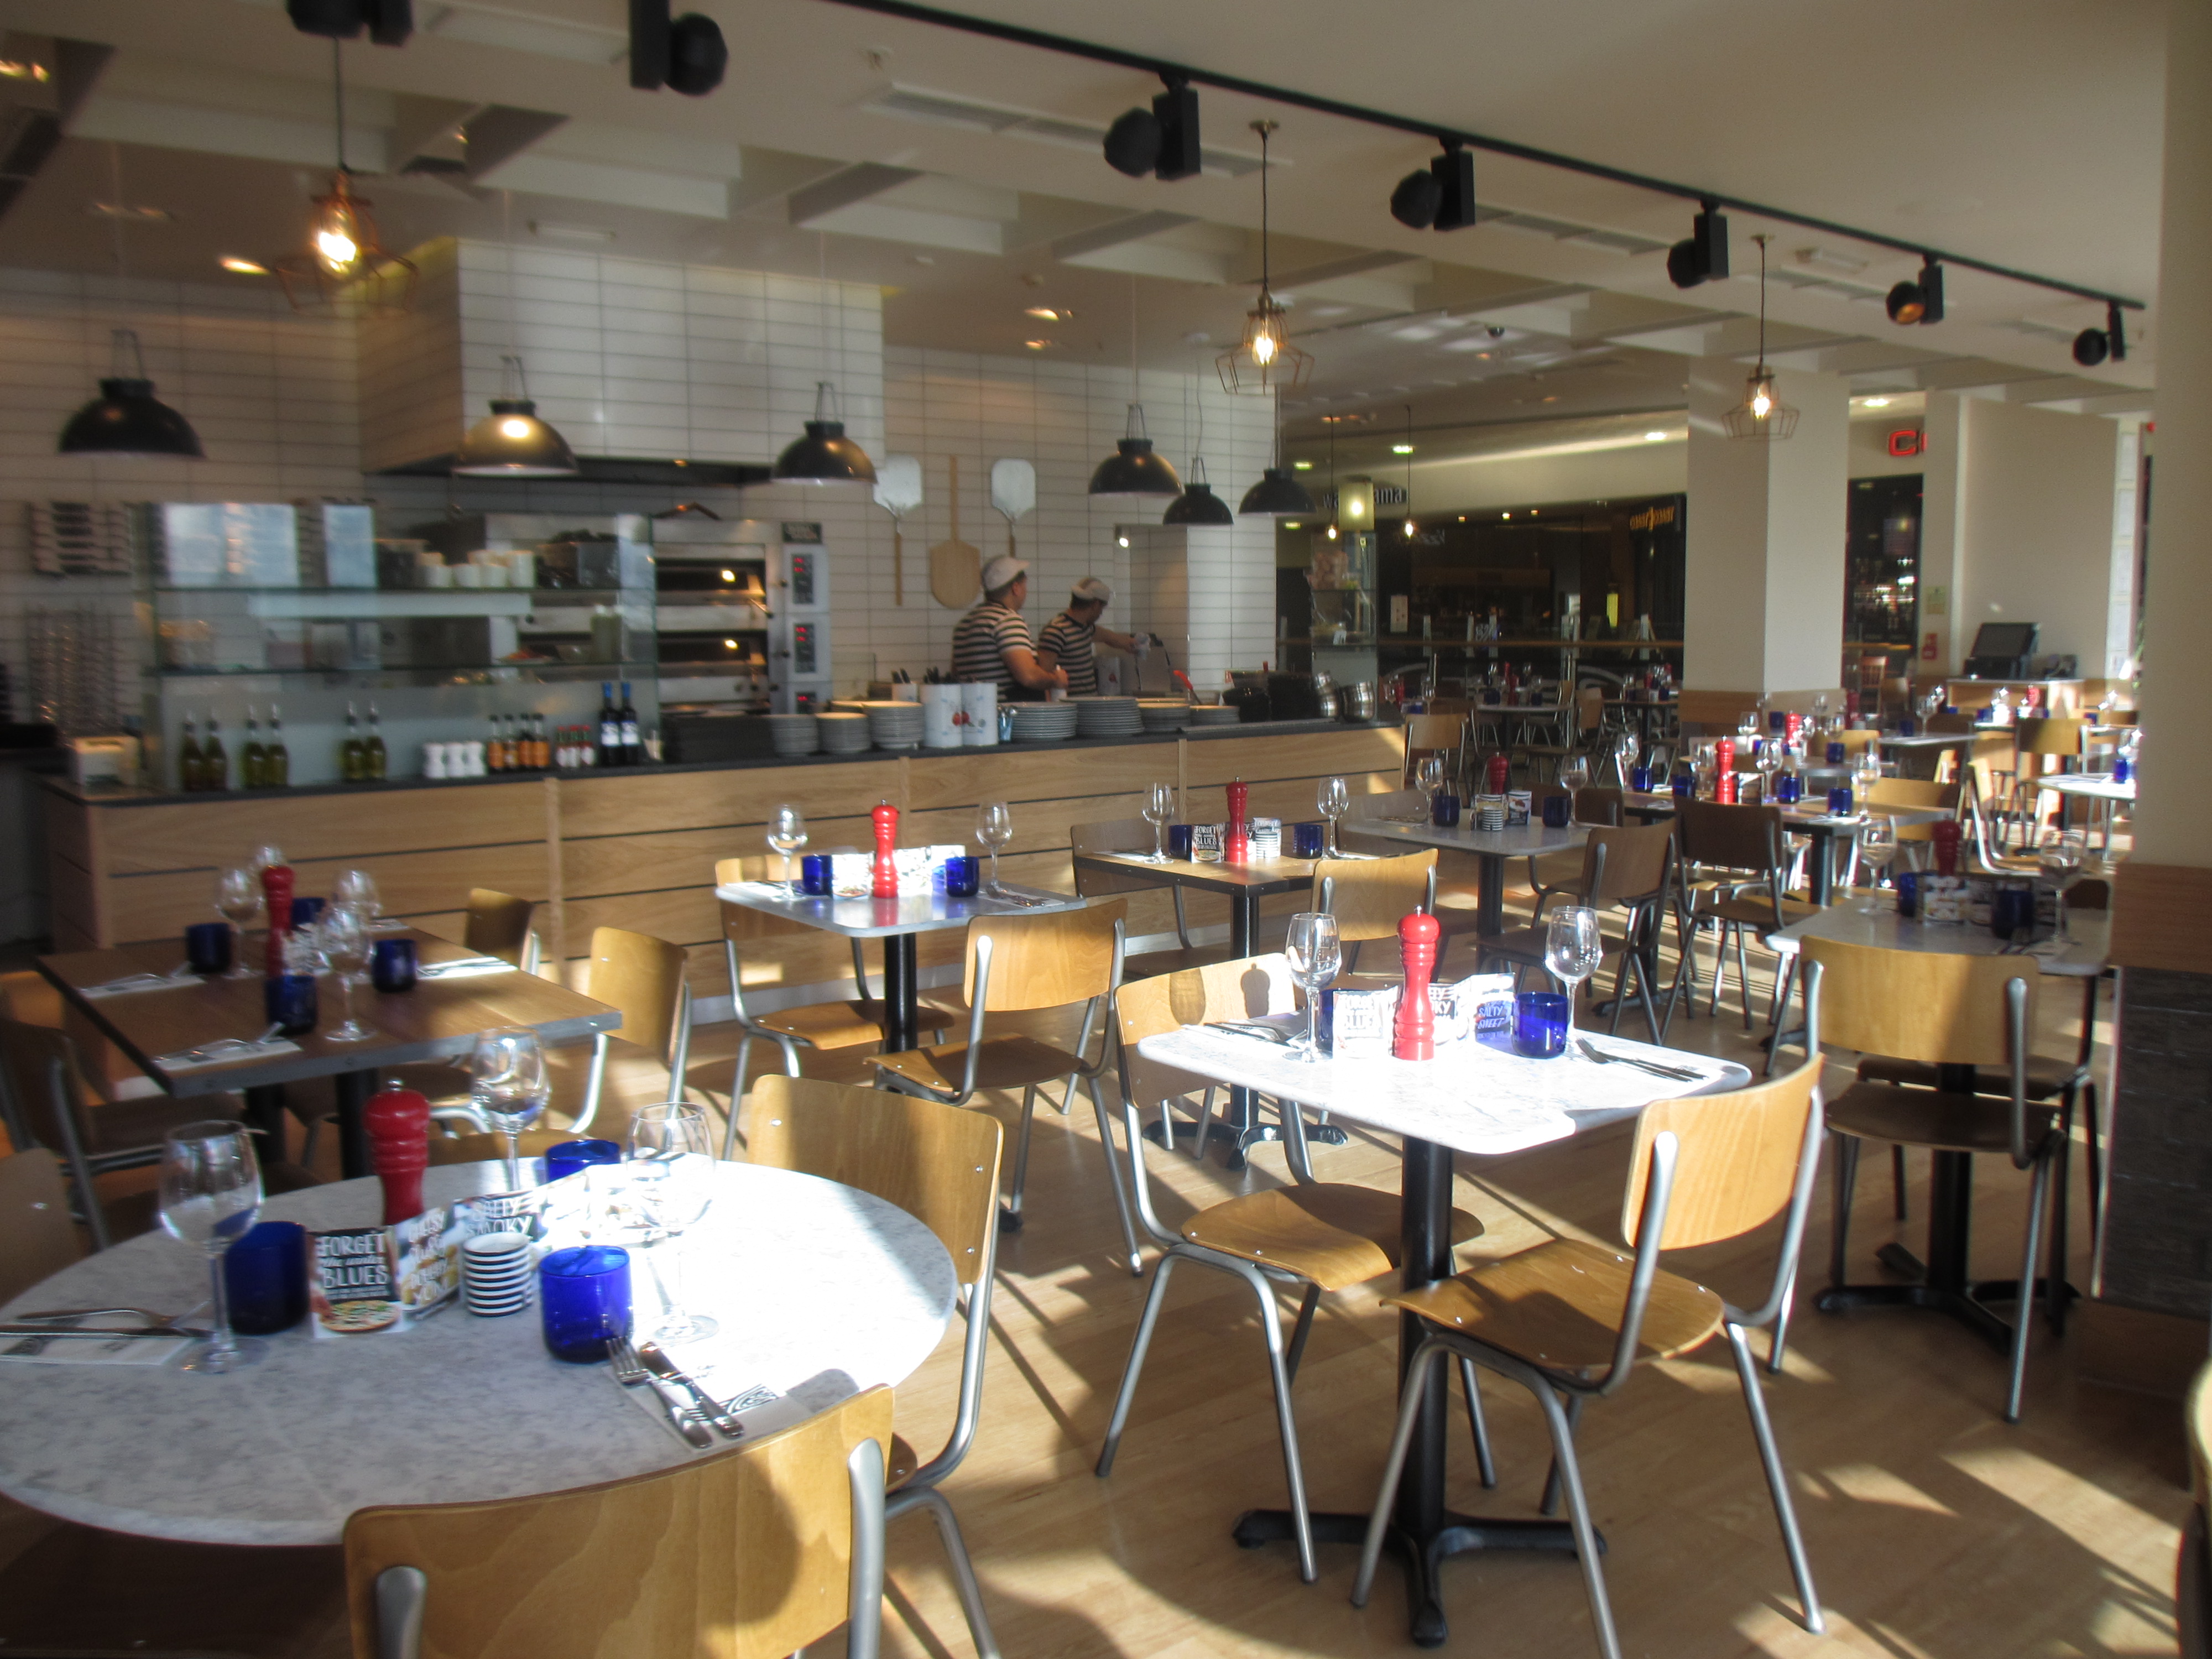 Pizza Express Solihull 01217 113478